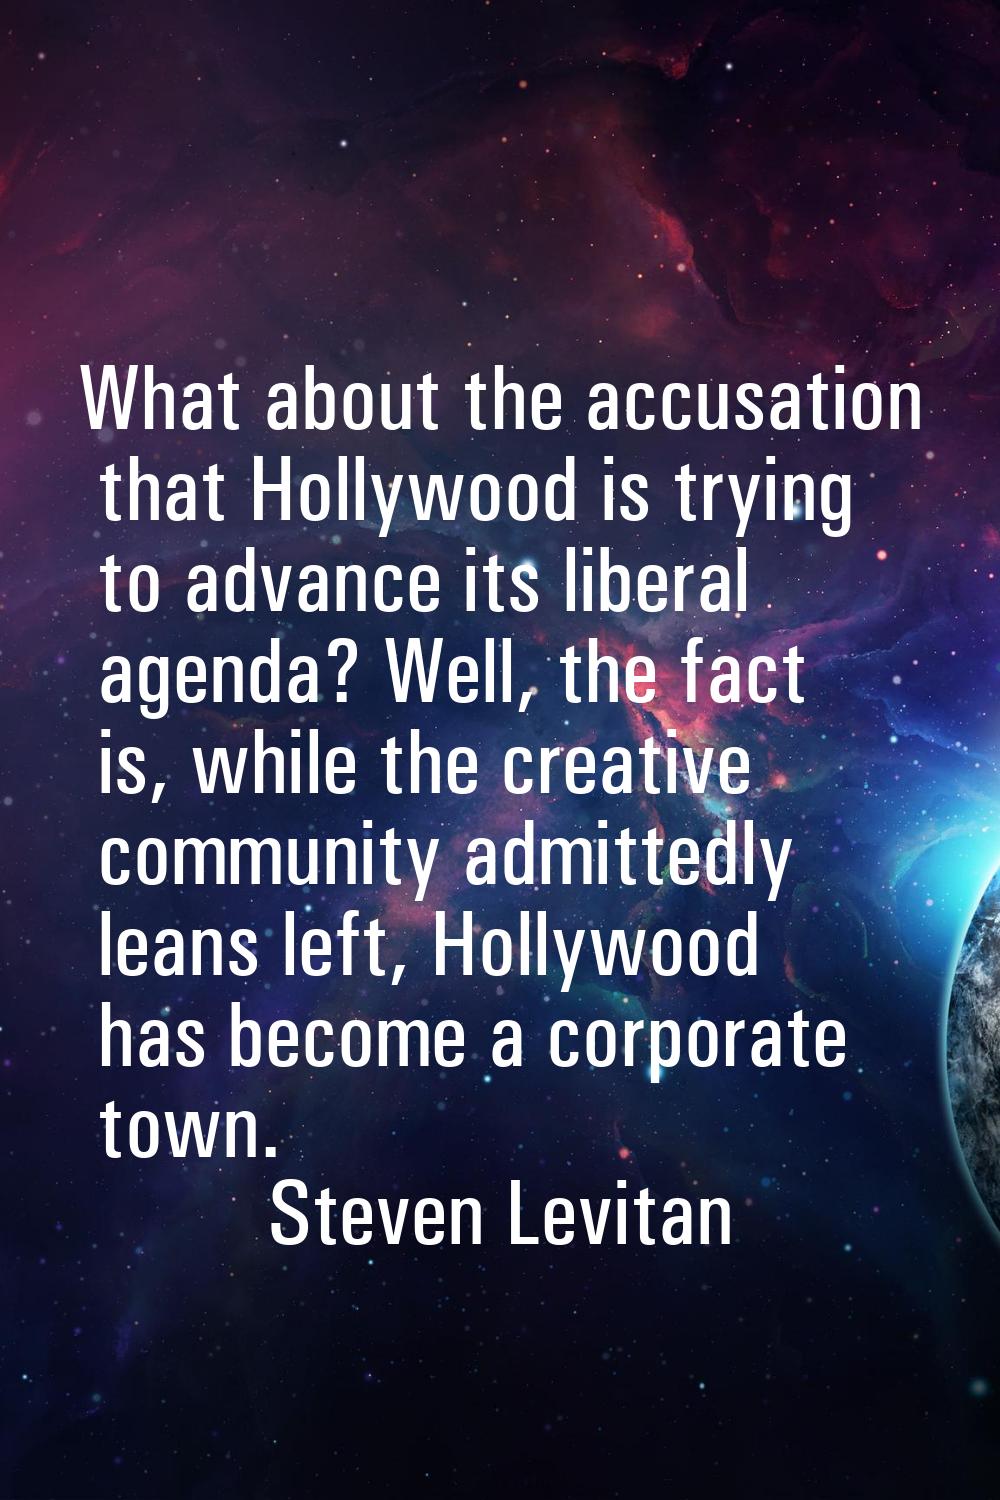 What about the accusation that Hollywood is trying to advance its liberal agenda? Well, the fact is